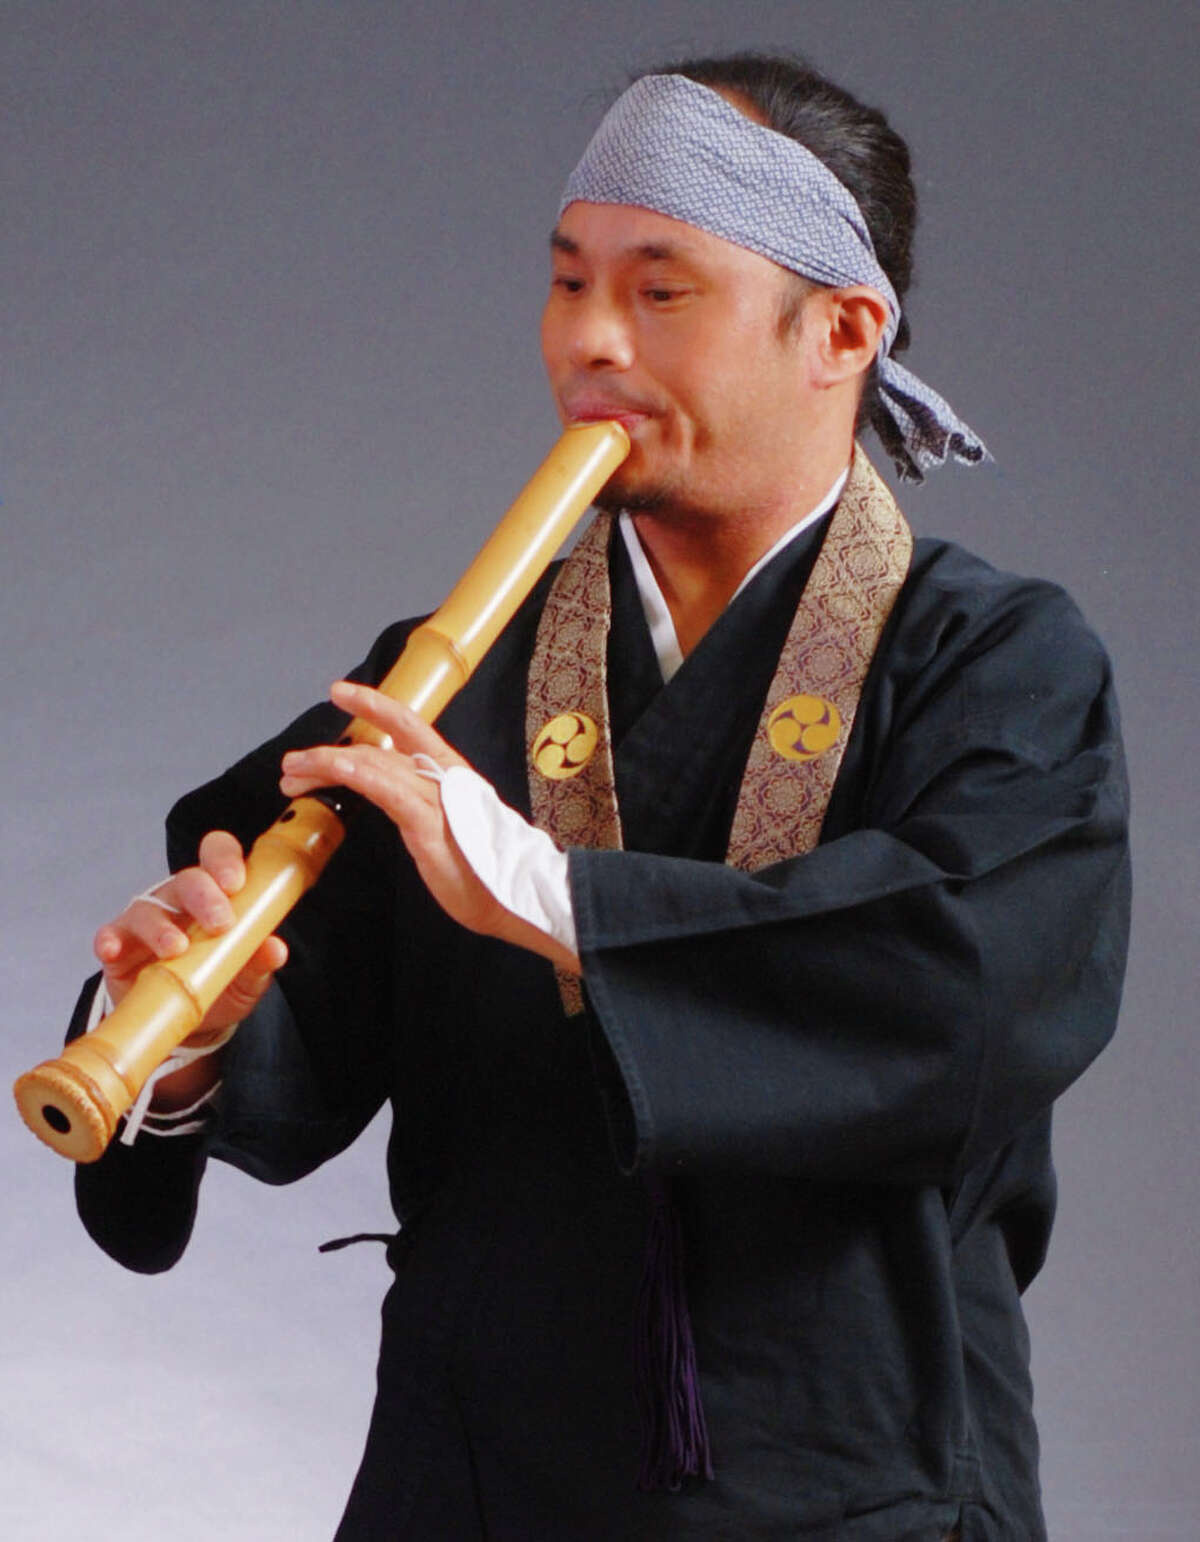 Alcvin Ryuzen Ramos will play the shakuhachi, a Japanese bamboo flute, at Cave Without a Name in Boerne.